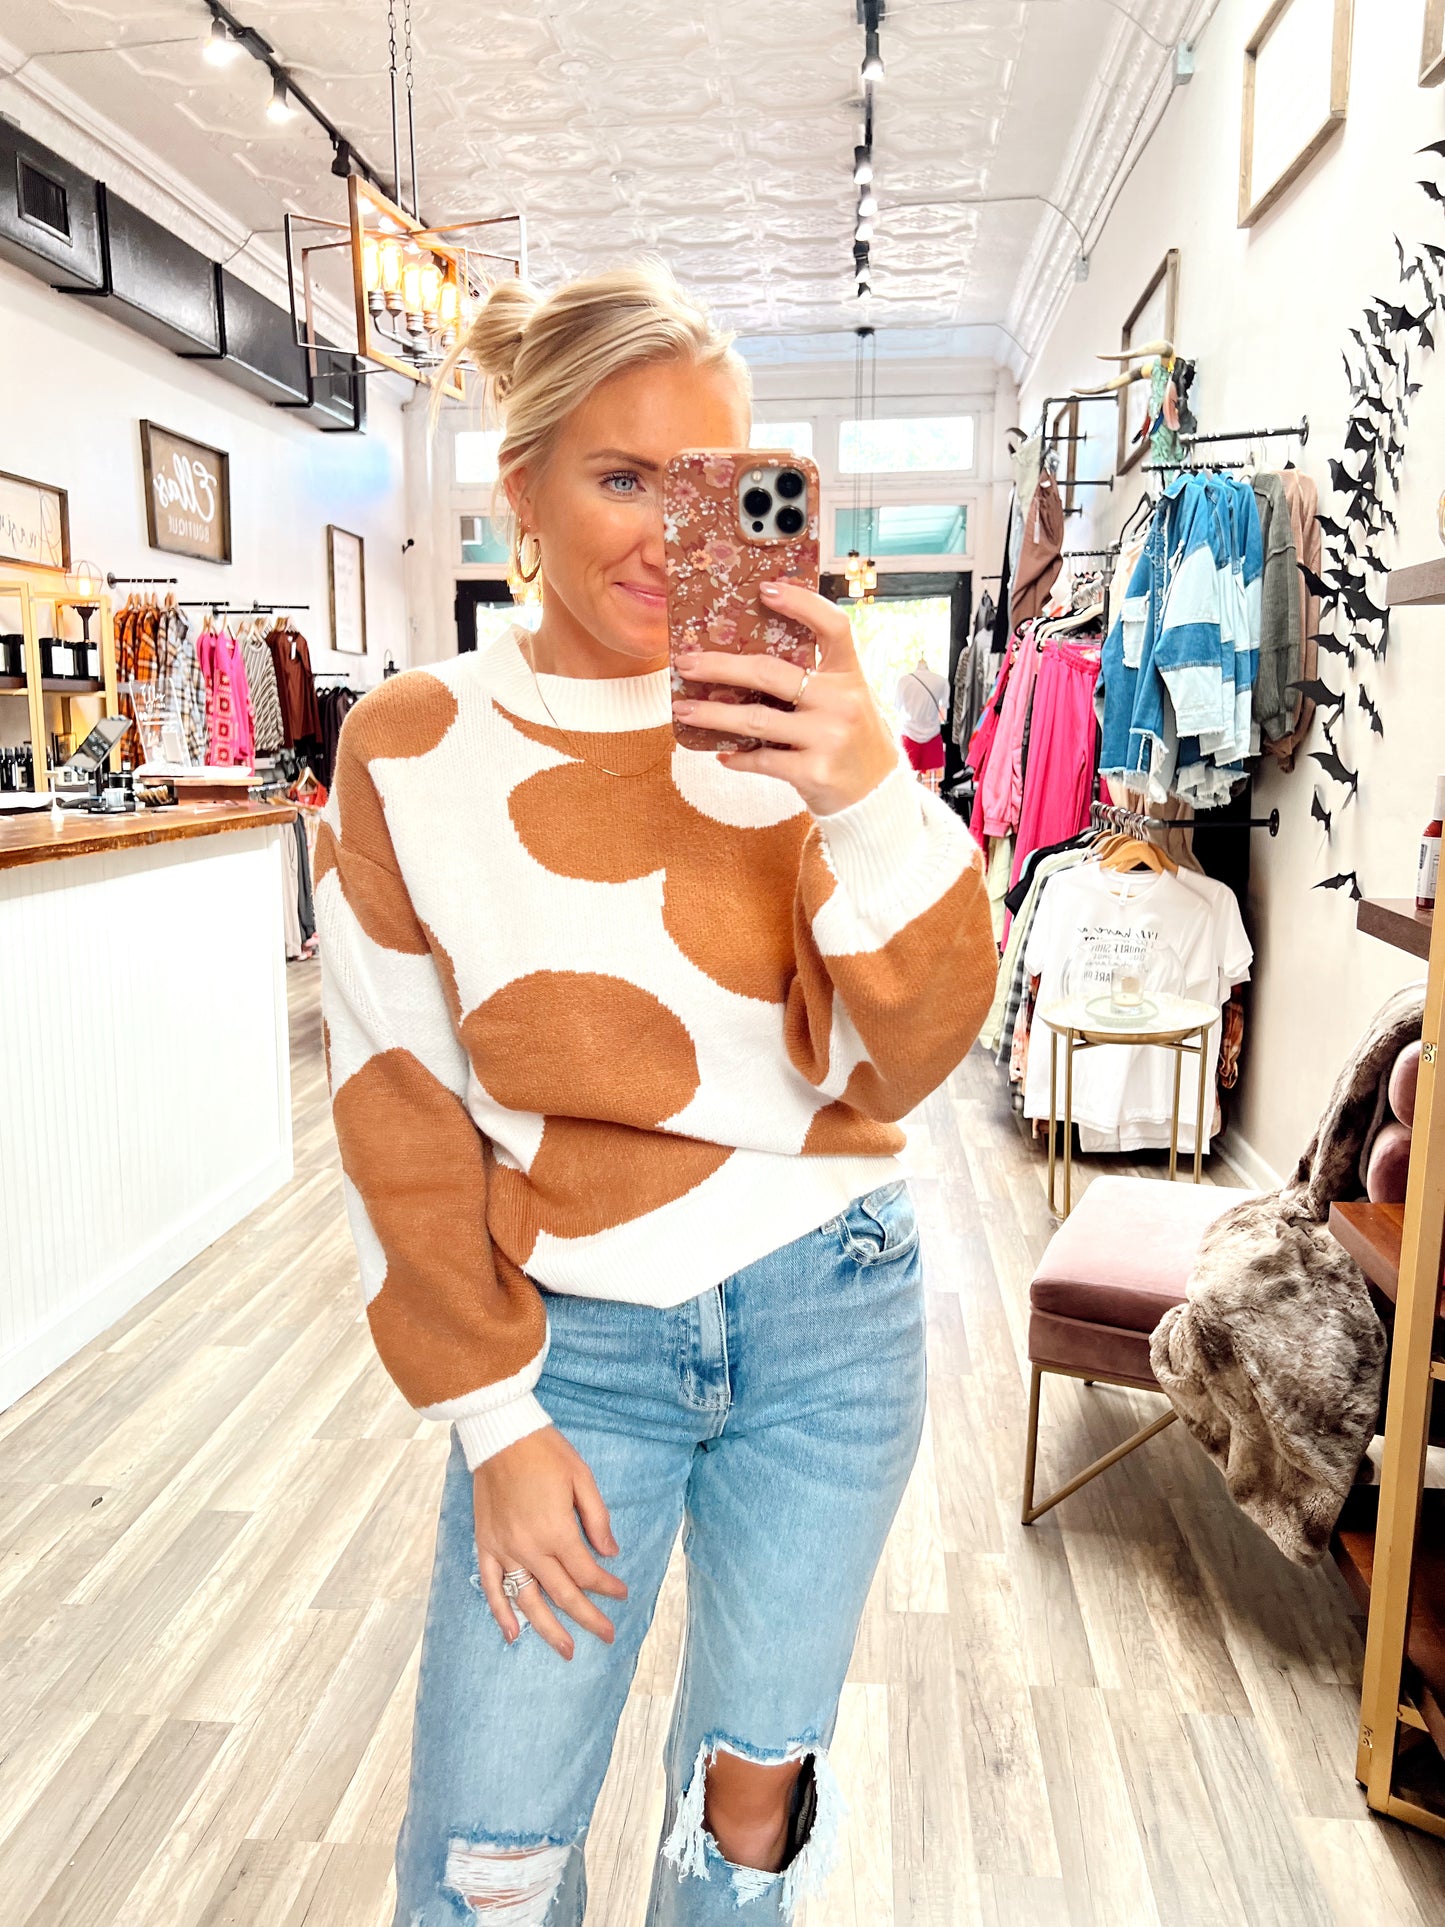 Fall Florals Sweater